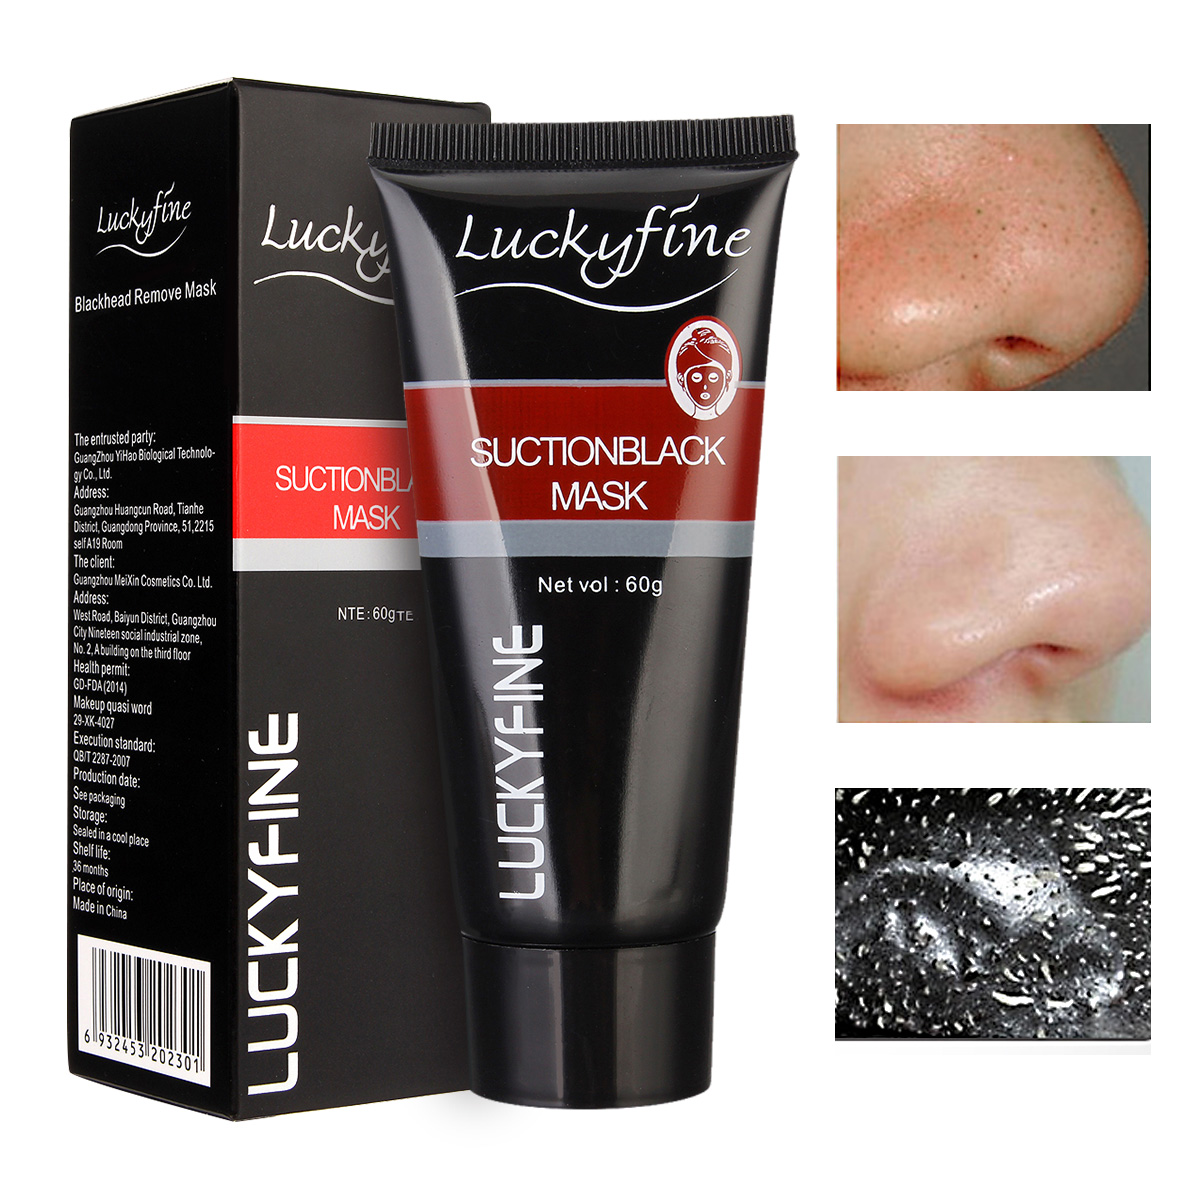 

Luckyfine Blackhead Removal Peel-off Black Facial Mask Pore Cleaner Purifying Acne Treatment